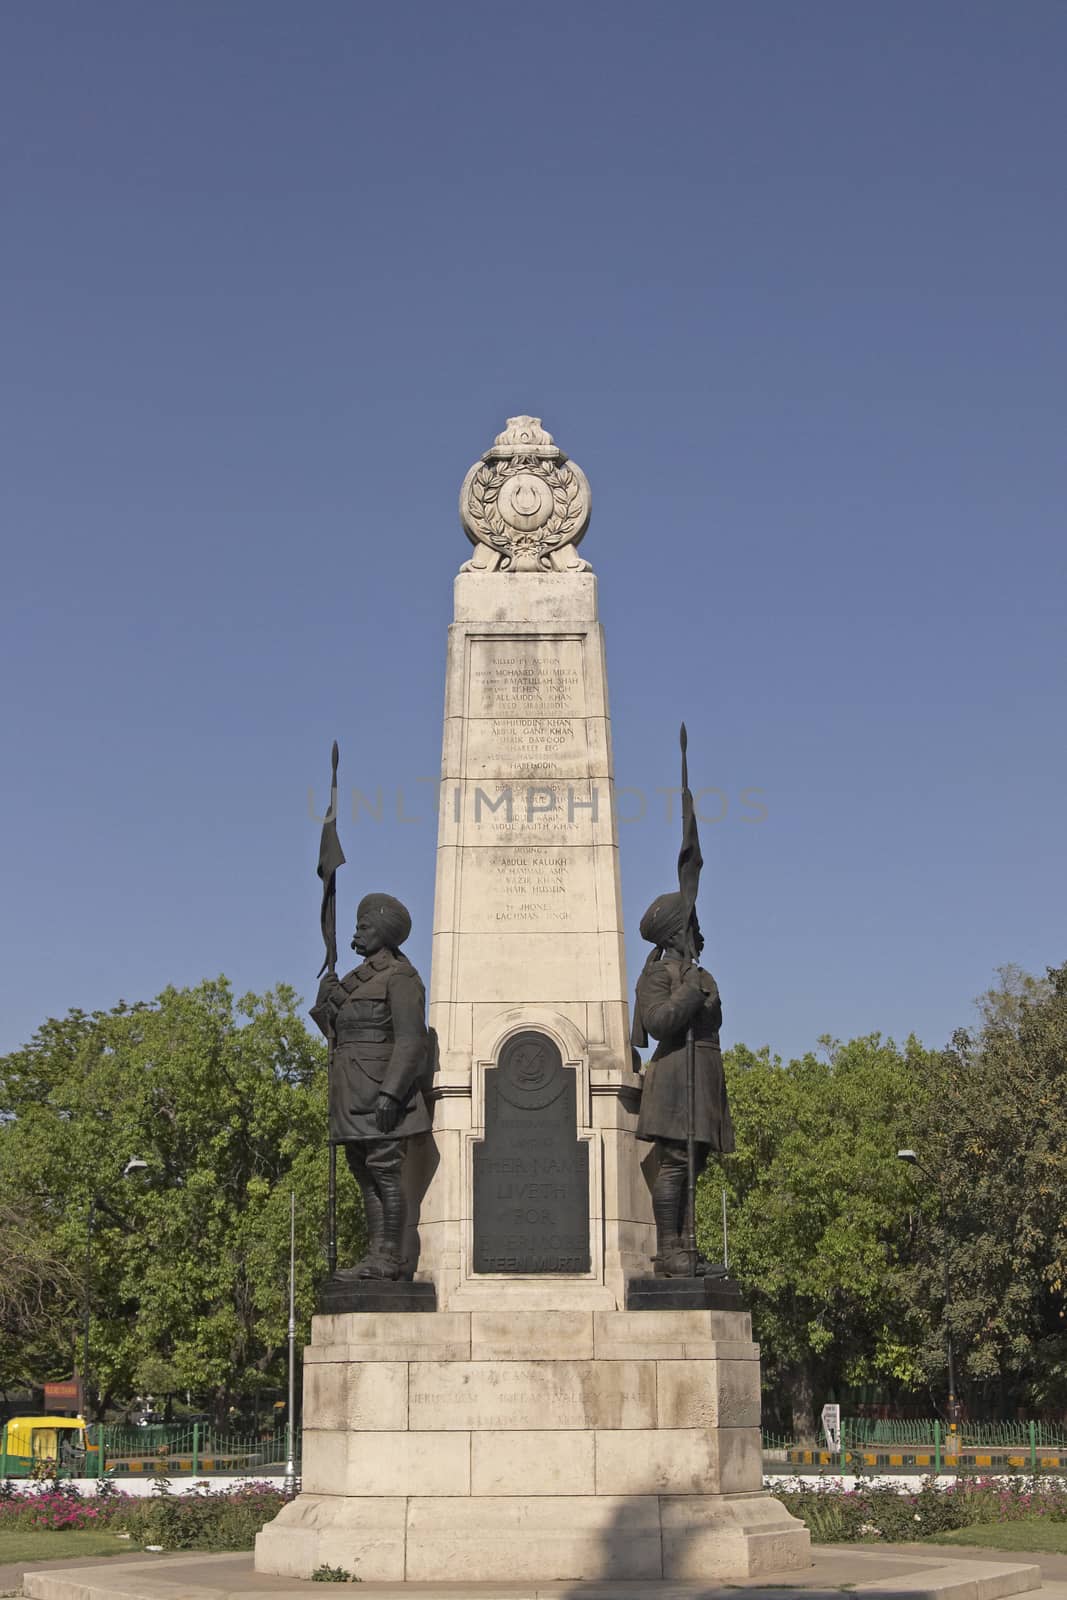 Military memorial to the Hyderabad Lancers on a roundabout (Teen Murti) in New Delhi, India